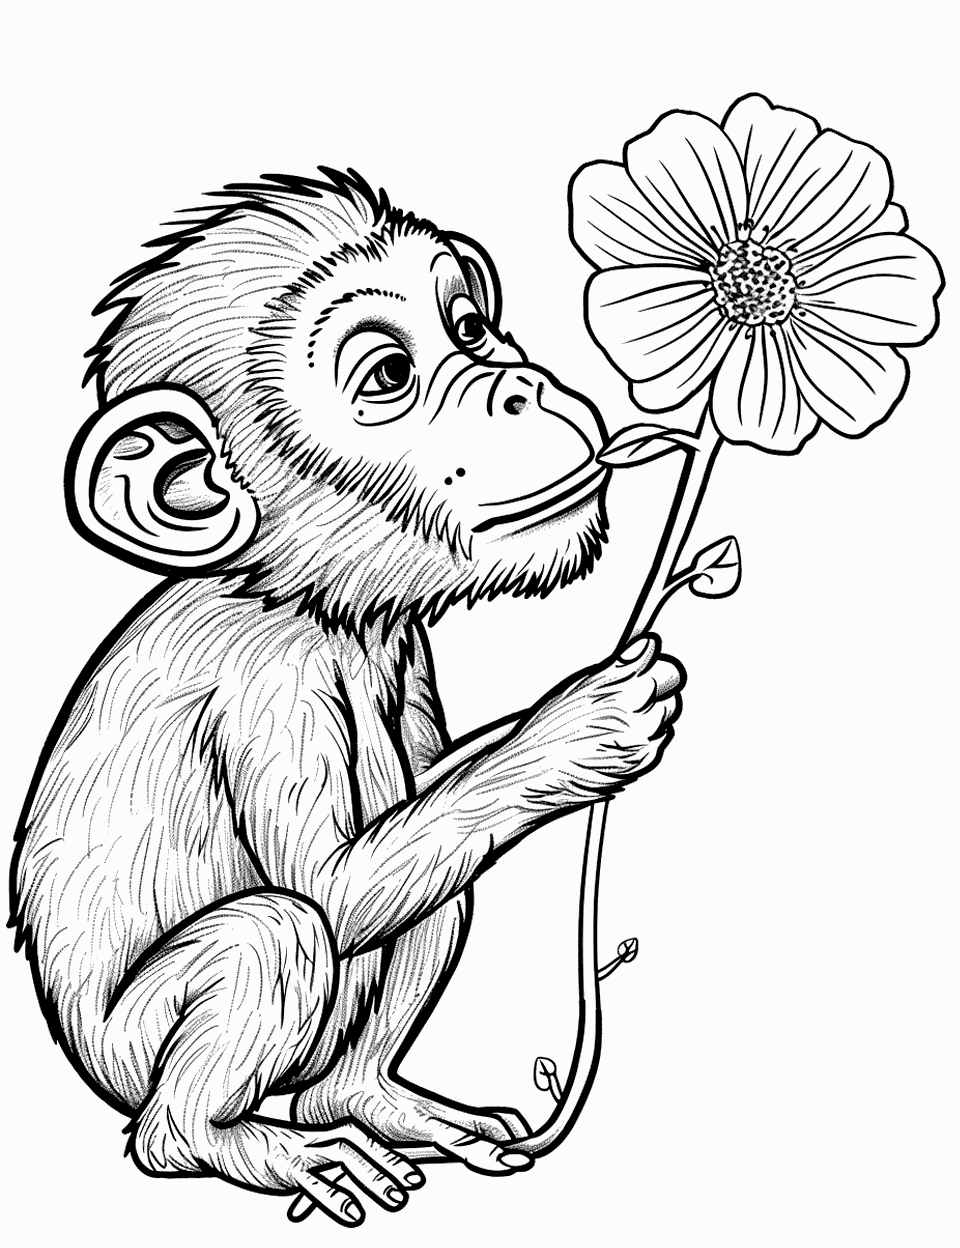 Monkey Holding a Flower Coloring Page - A gentle scene of a monkey sniffing a large flower.